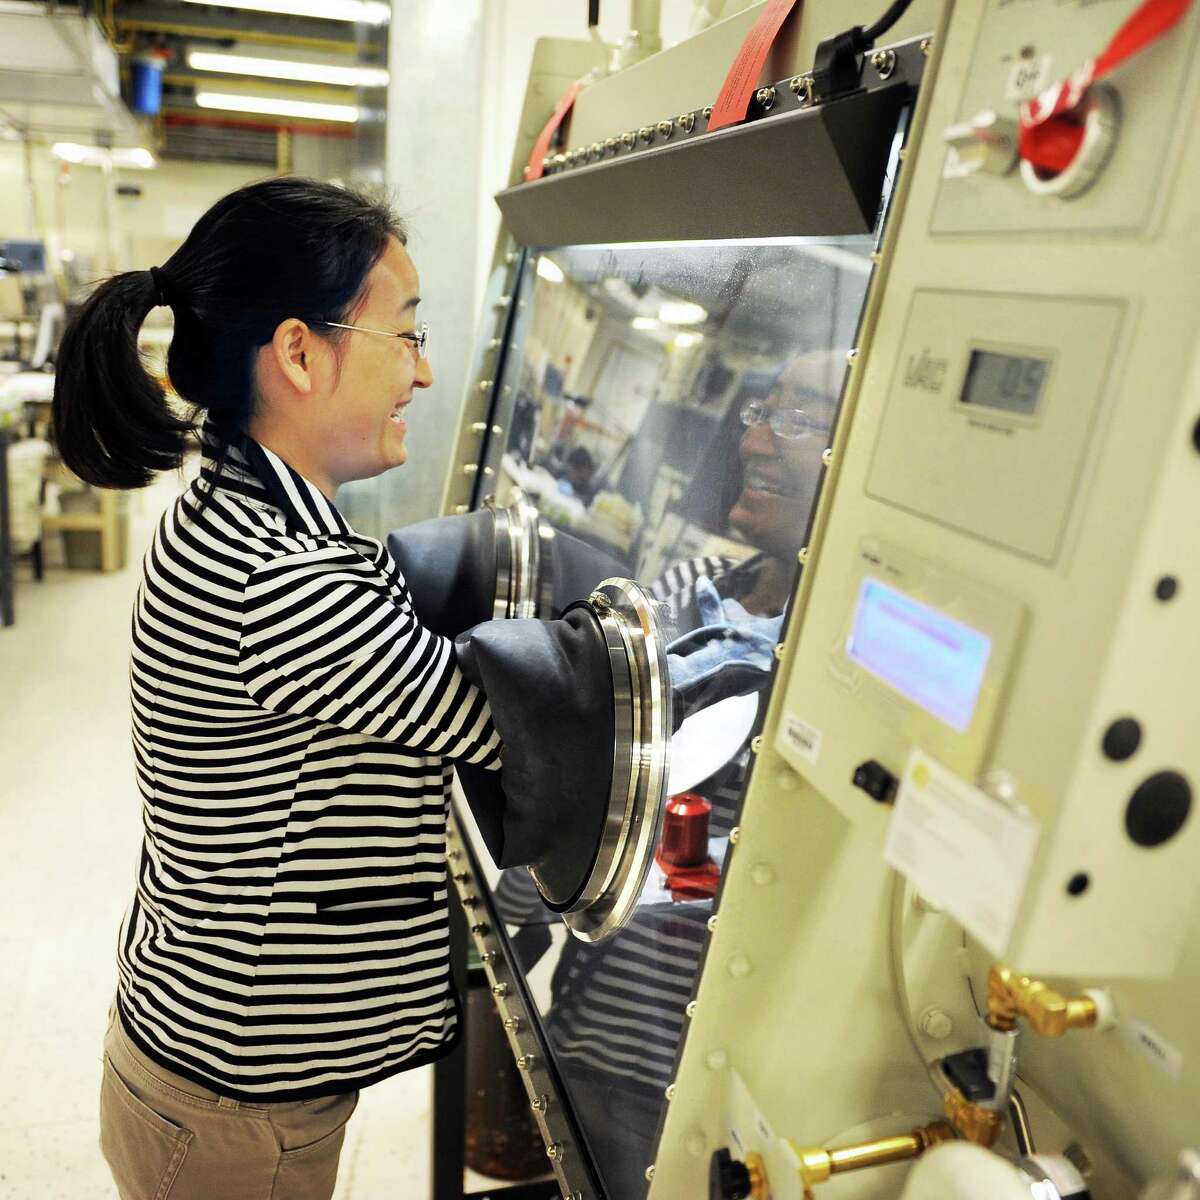 Research scientist Shasha Zhang works in the Glove Box, a controlled environment used for manufacturing BESS Tech's batteries in a SUNY Poly campus lab at CNSE Tuesday June 23, 2015 in Albany, NY. (John Carl D'Annibale / Times Union)